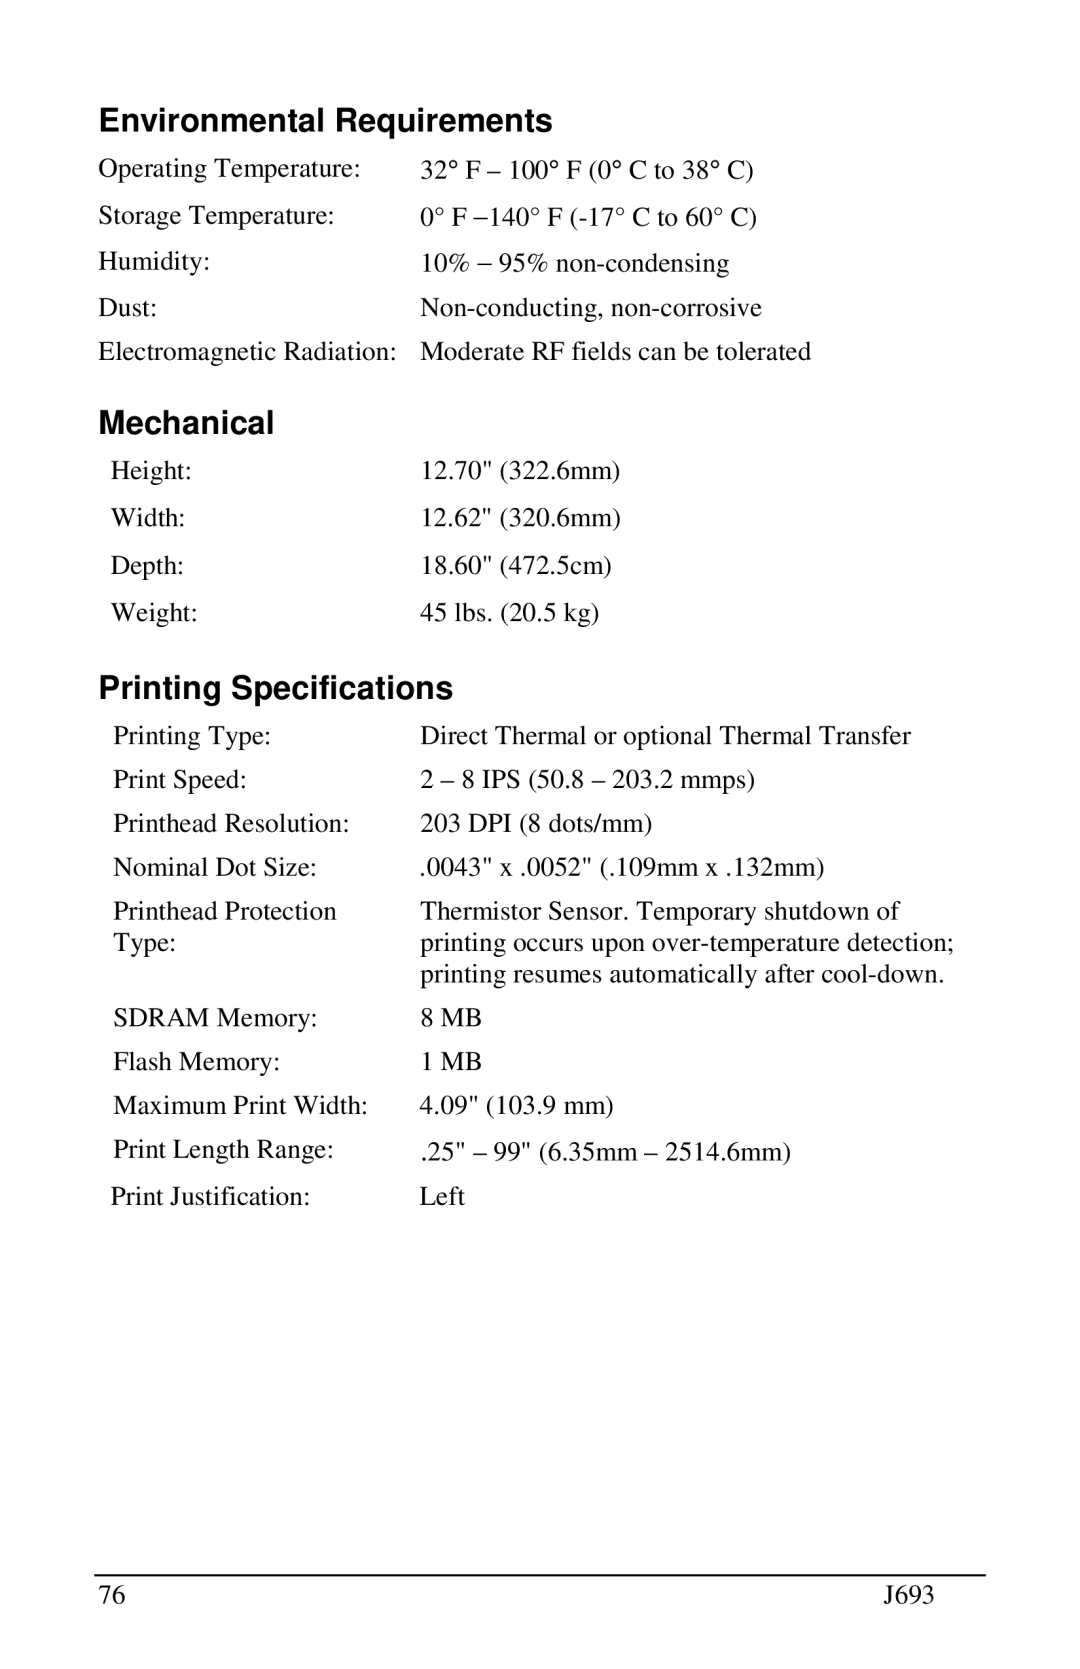 Pitney Bowes J693 manual Environmental Requirements, Mechanical, Printing Specifications 